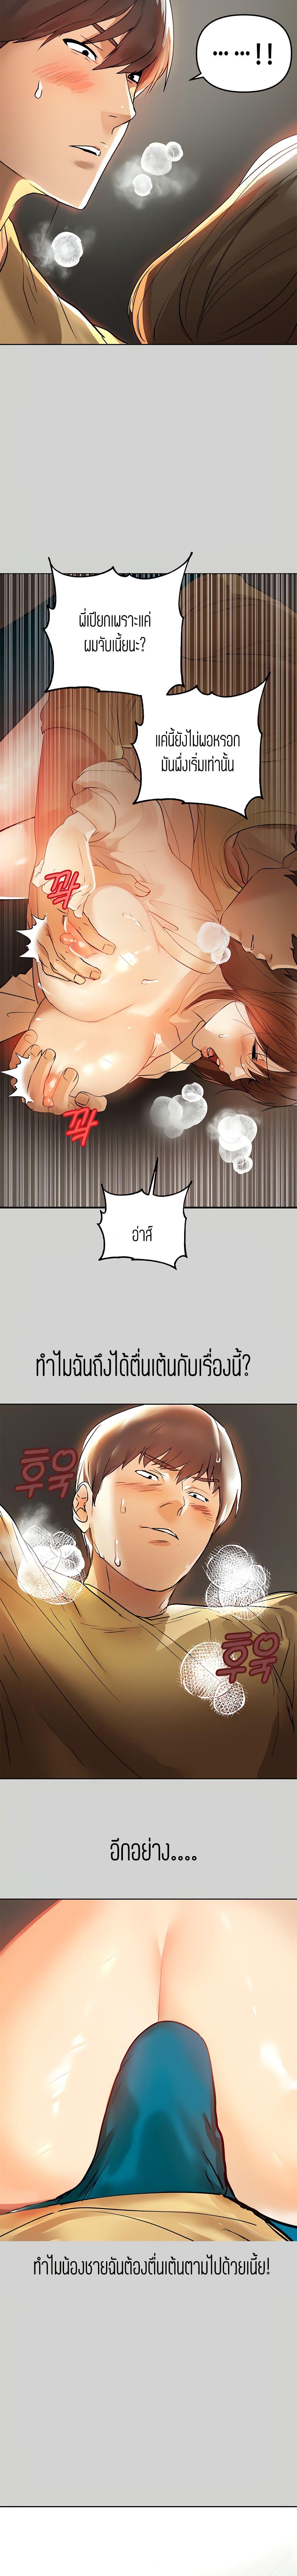 The Owner Of A Building ตอนที่ 3 ภาพ 6